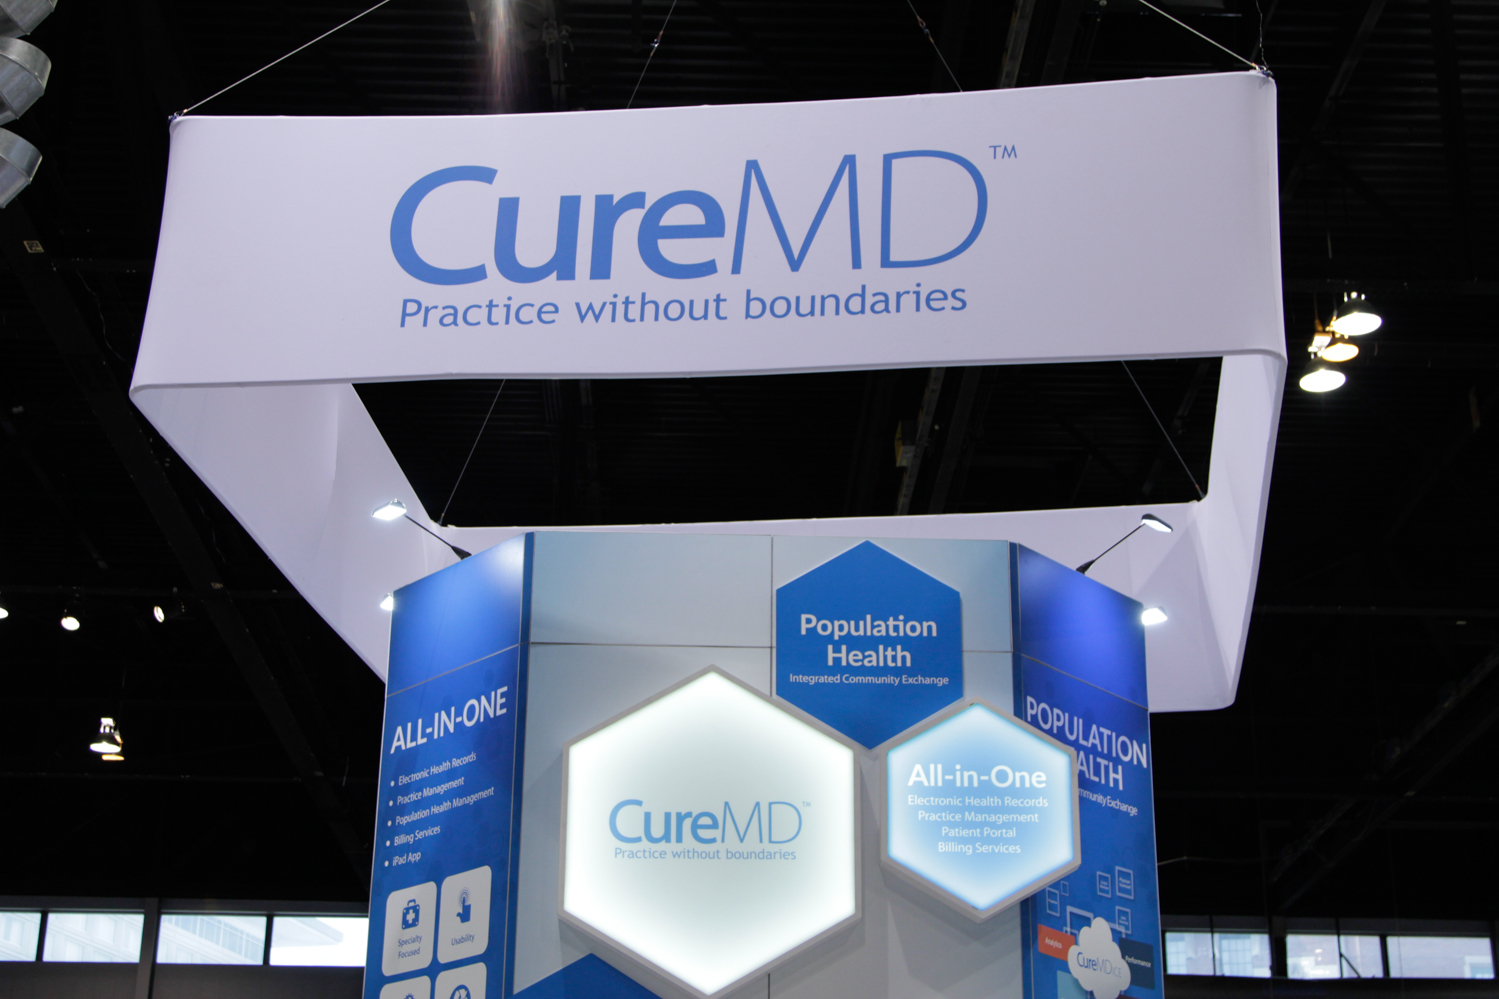 CureMD at HIMSS 2015